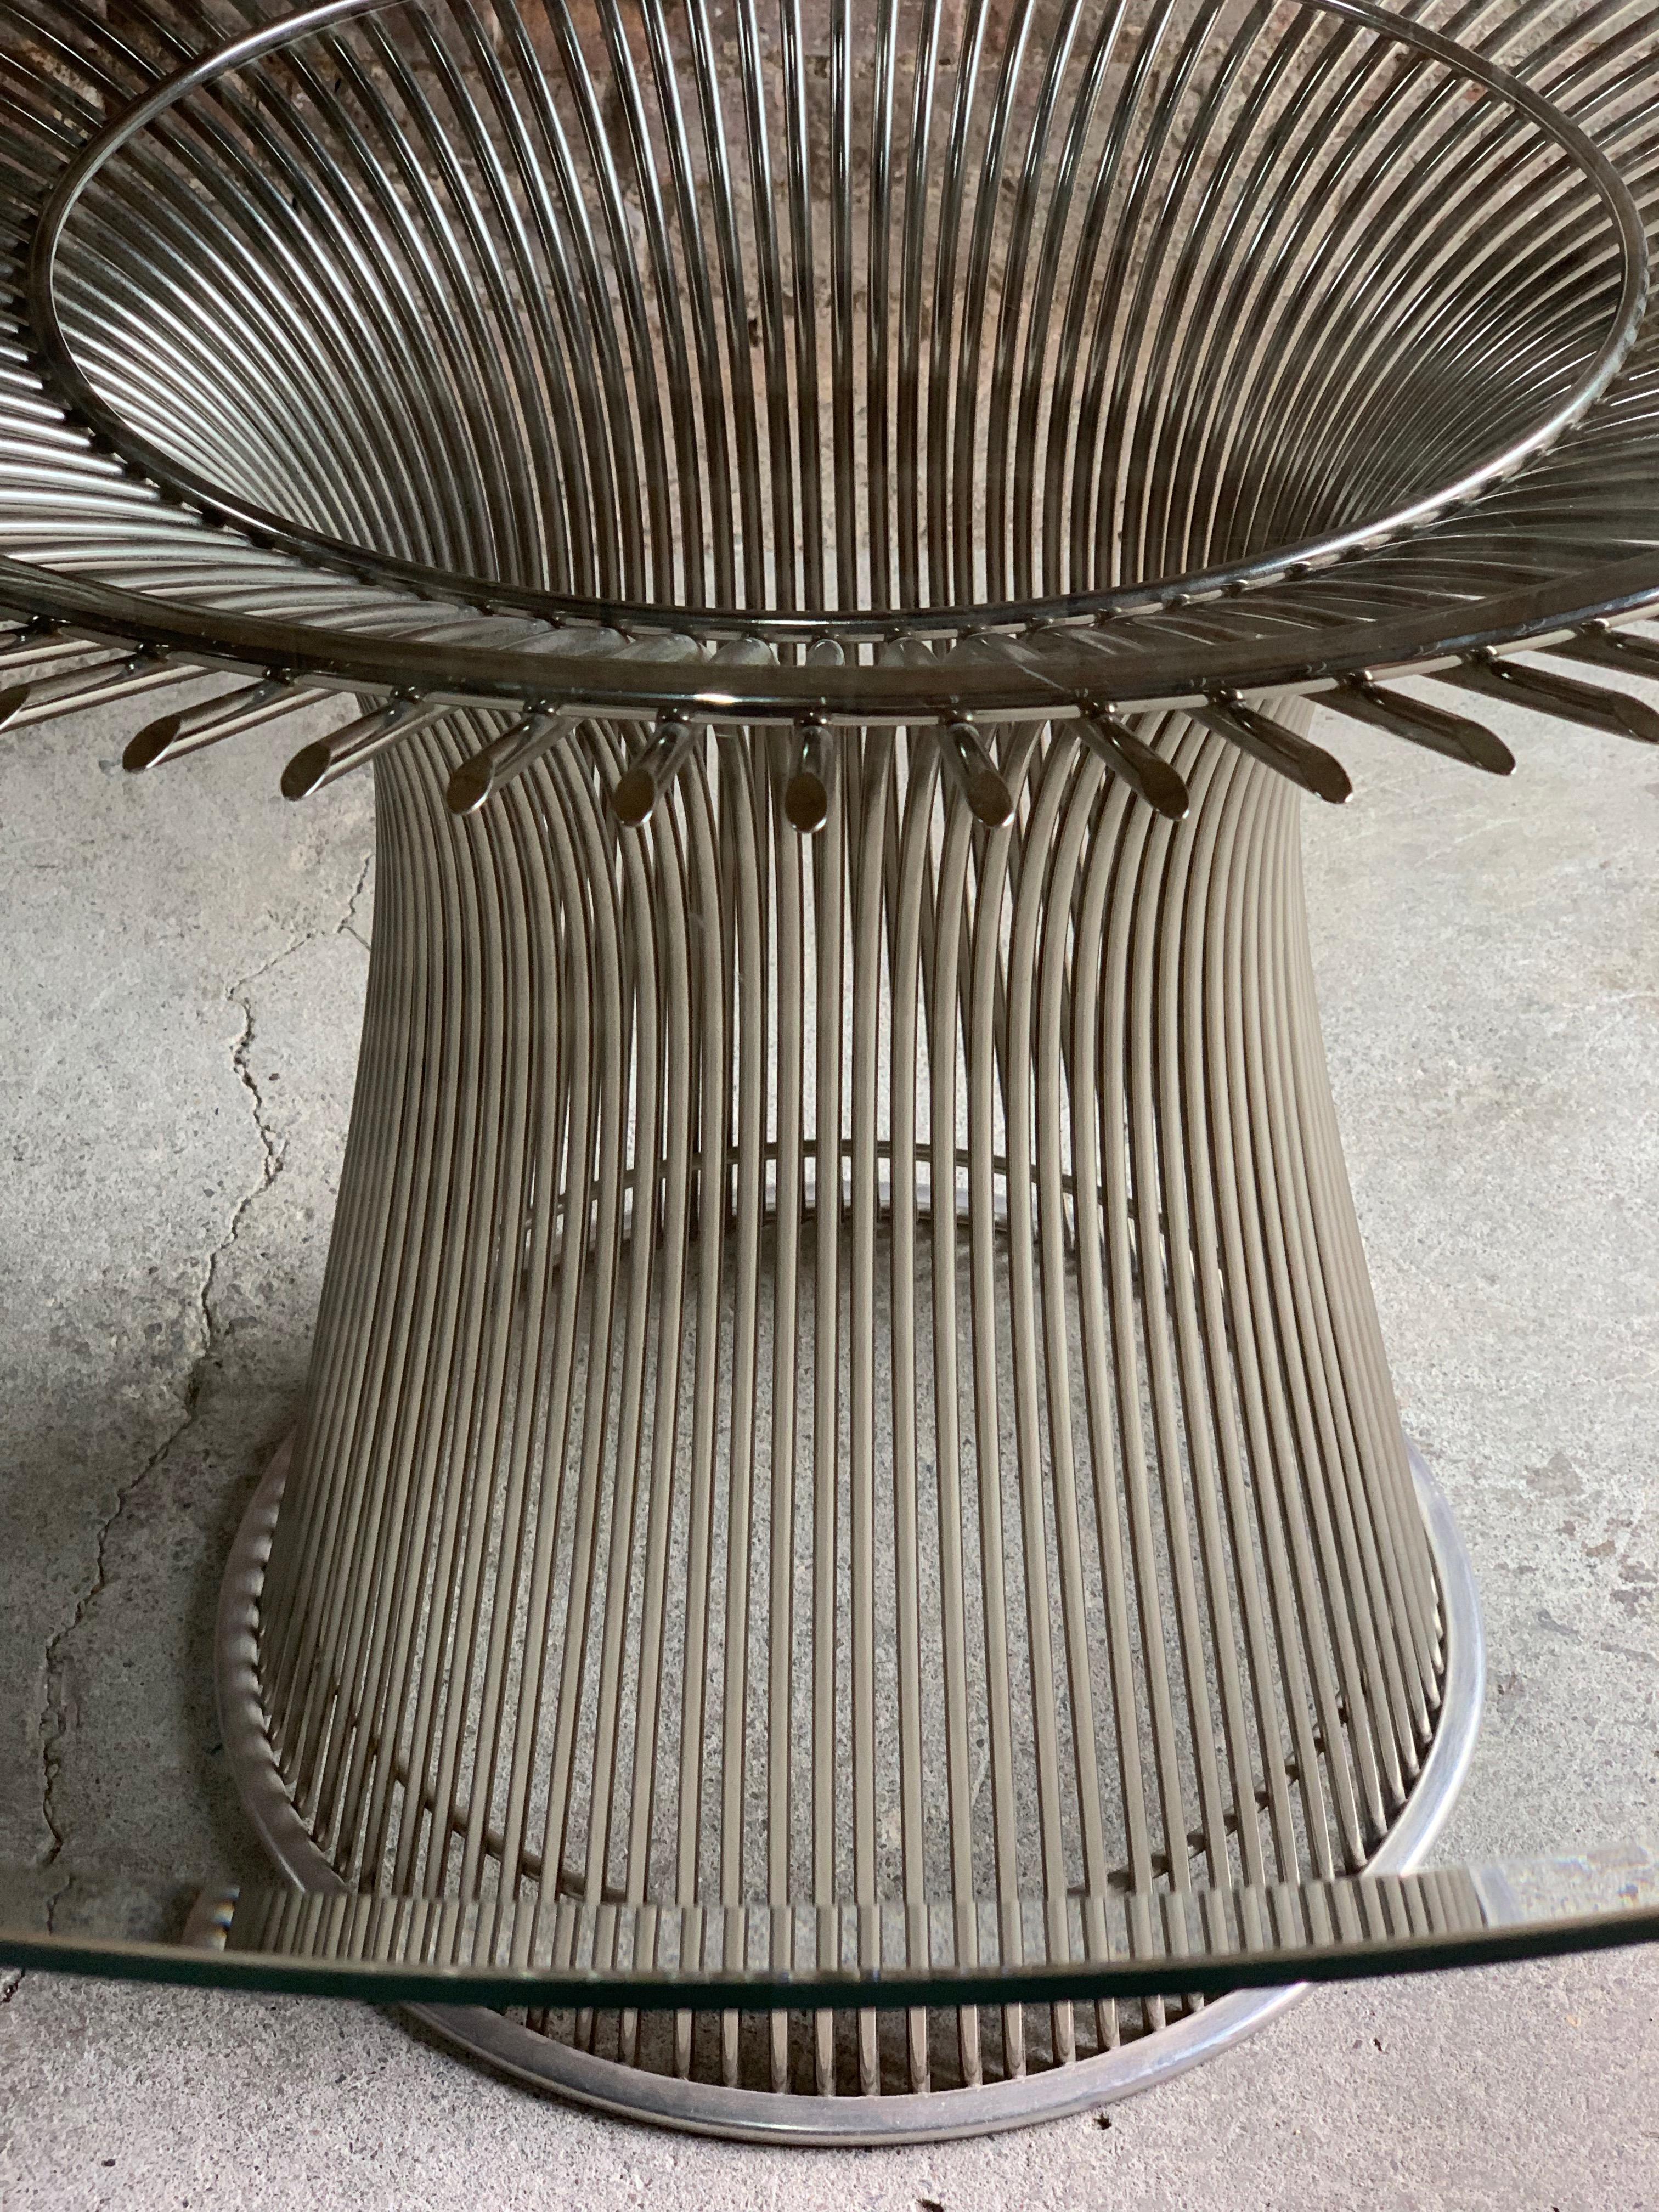 Platner dining table by Warren Platner for Knoll Mid-Century Modern design 20th century

In 1966, the Platner collection captured the “decorative, gentle, graceful” shapes that were beginning to infiltrate the modern vocabulary. The iconic Platner